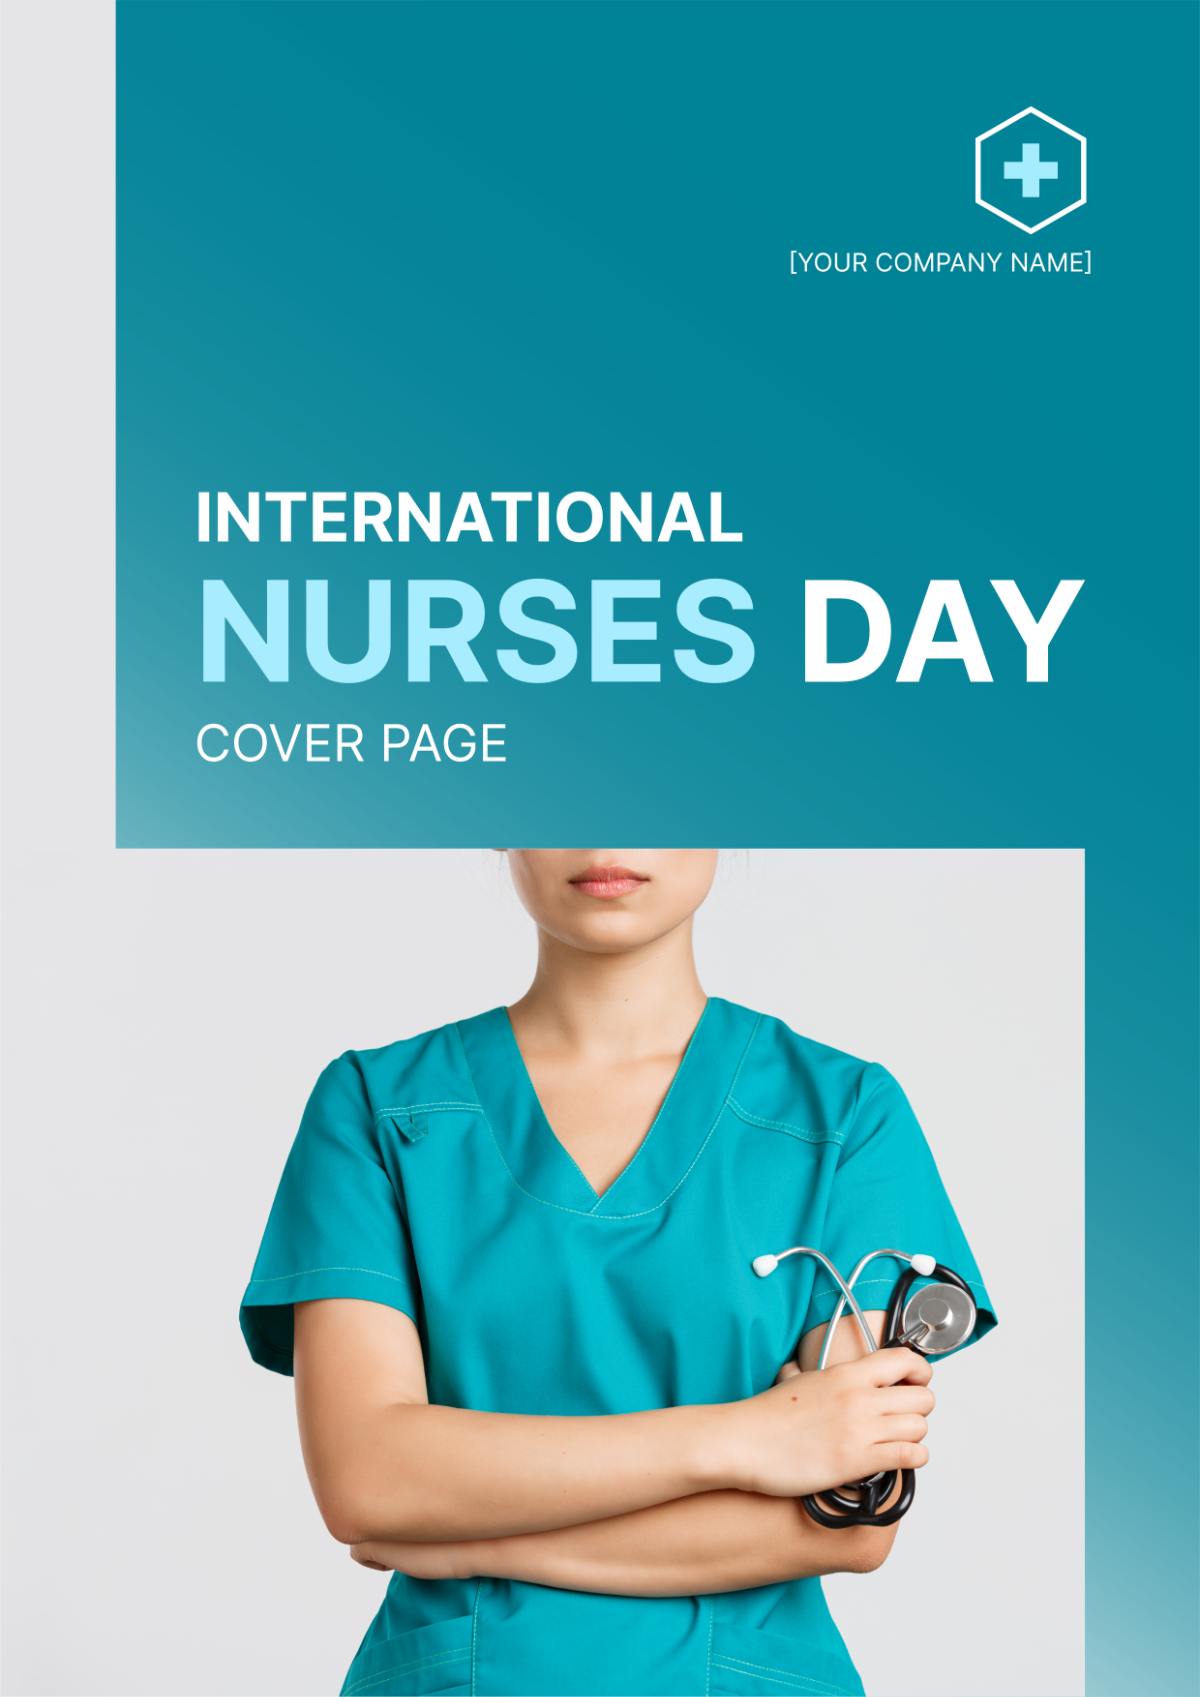 International Nurses Day Cover Page Template